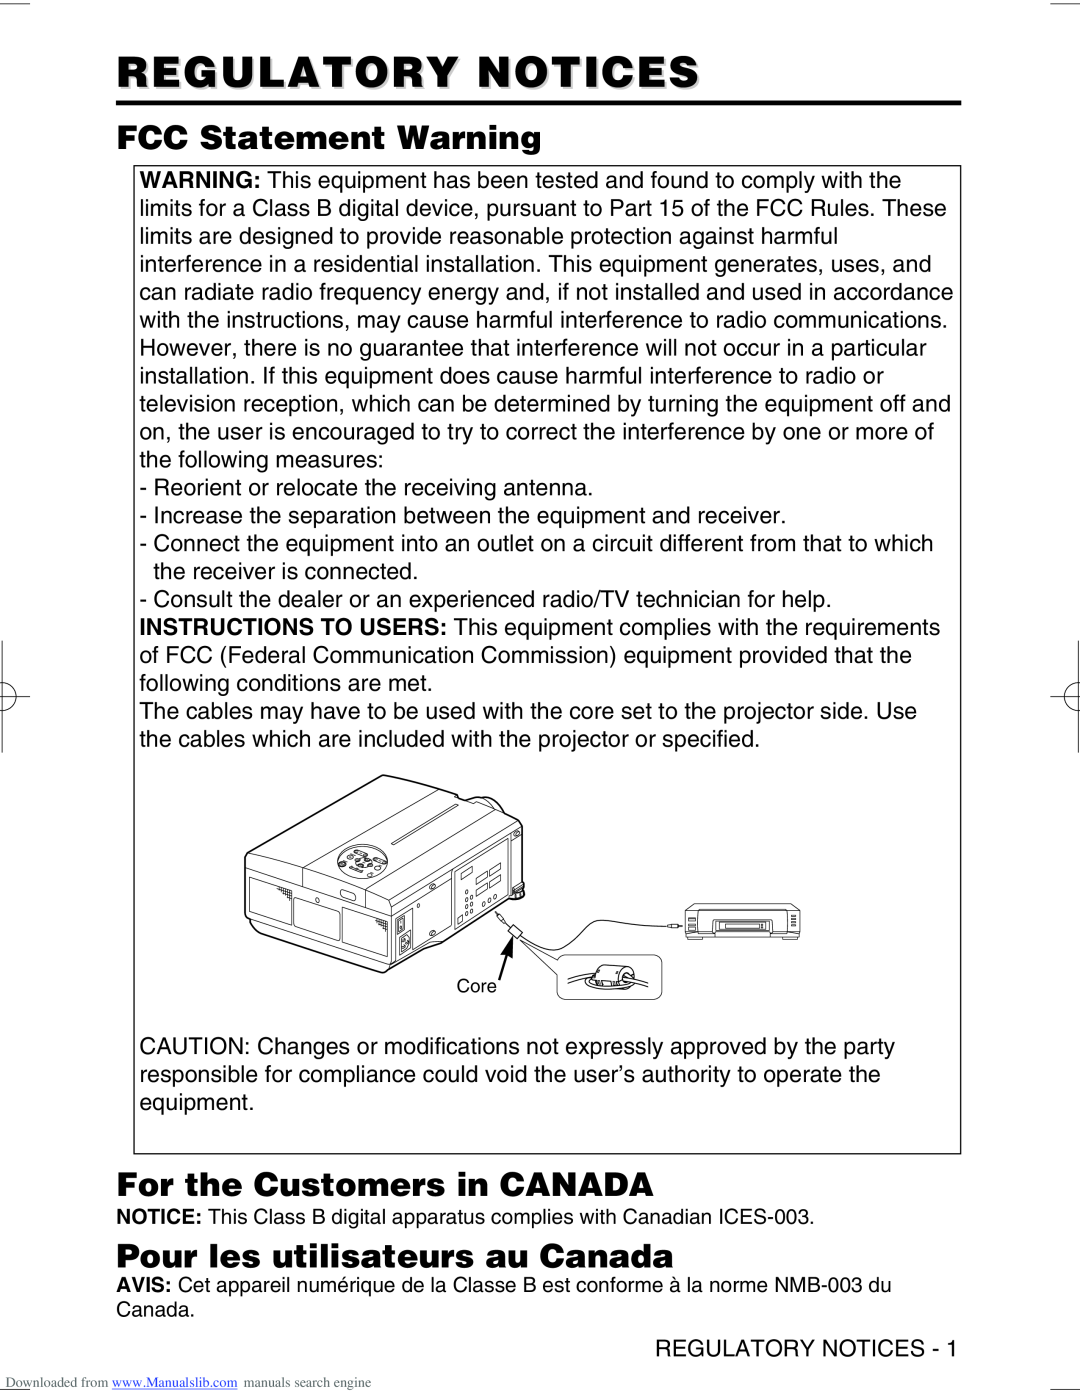 Hitachi CP-X995W Regulatory Notices, FCC Statement Warning, For the Customers in CANADA, Pour les utilisateurs au Canada 